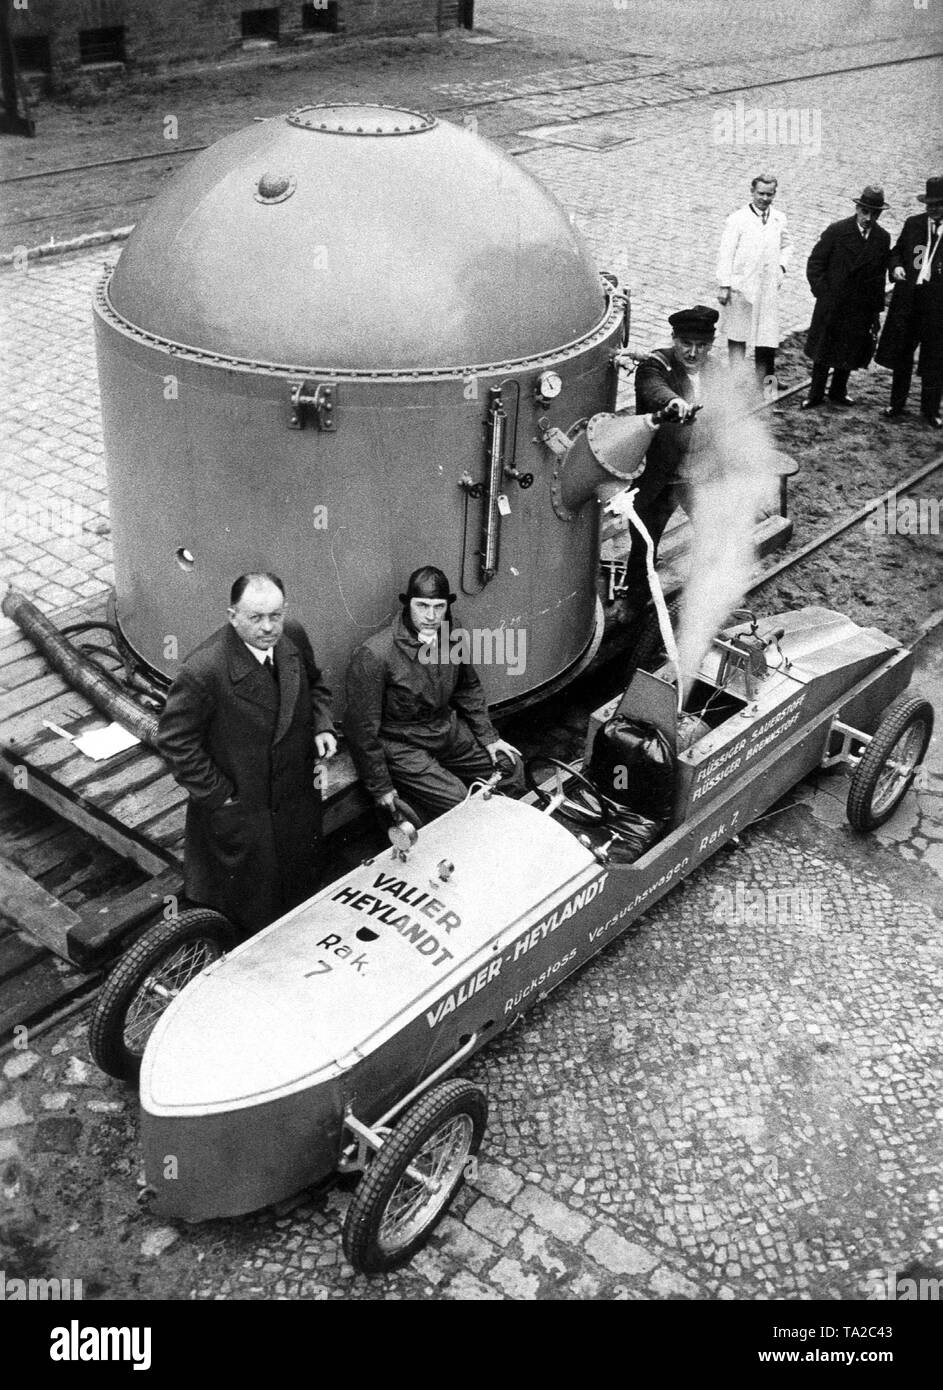 The engineer Max Valier (r.) and P. Heylandt (l.) when refueling their rocket car with liquid oxygen. Stock Photo